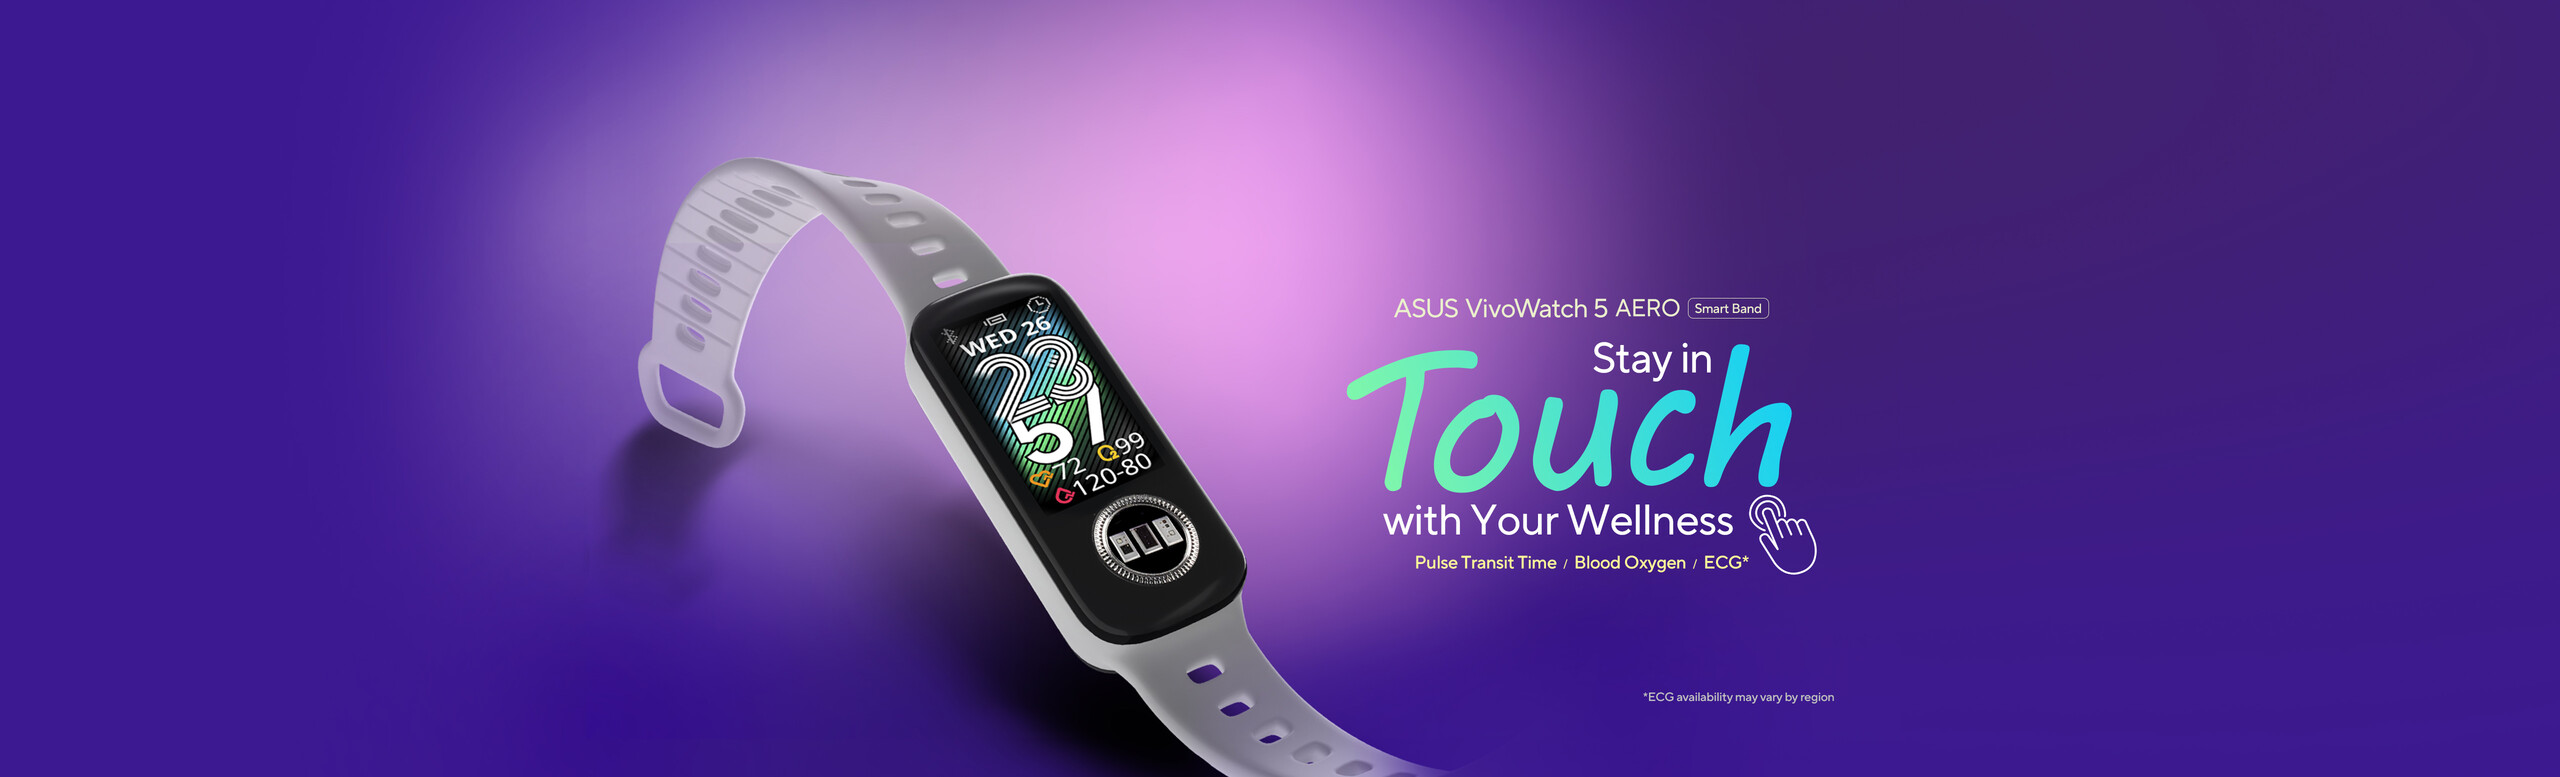 Learn more about the Vivowatch 5 Aero